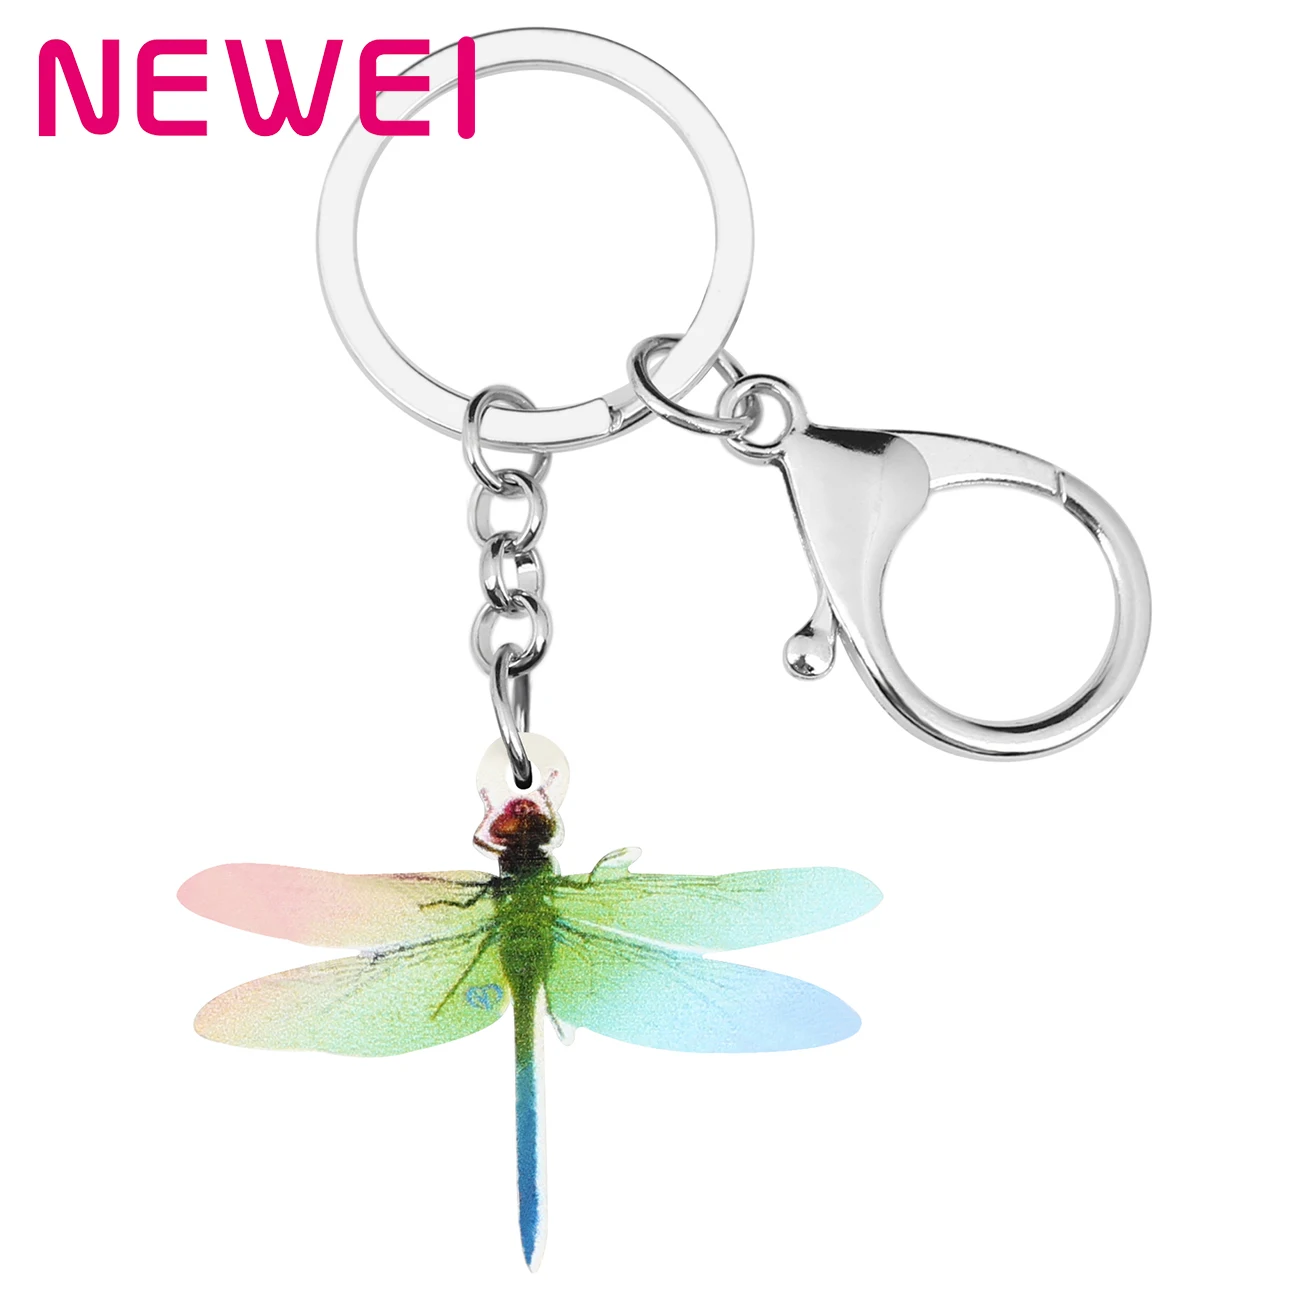 

Newei Acrylic Dragonfly Keychains Keyring Cute Insect Animal Key Chain Jewelry For Friends Kids Teen Novelty Gift Car Decoration